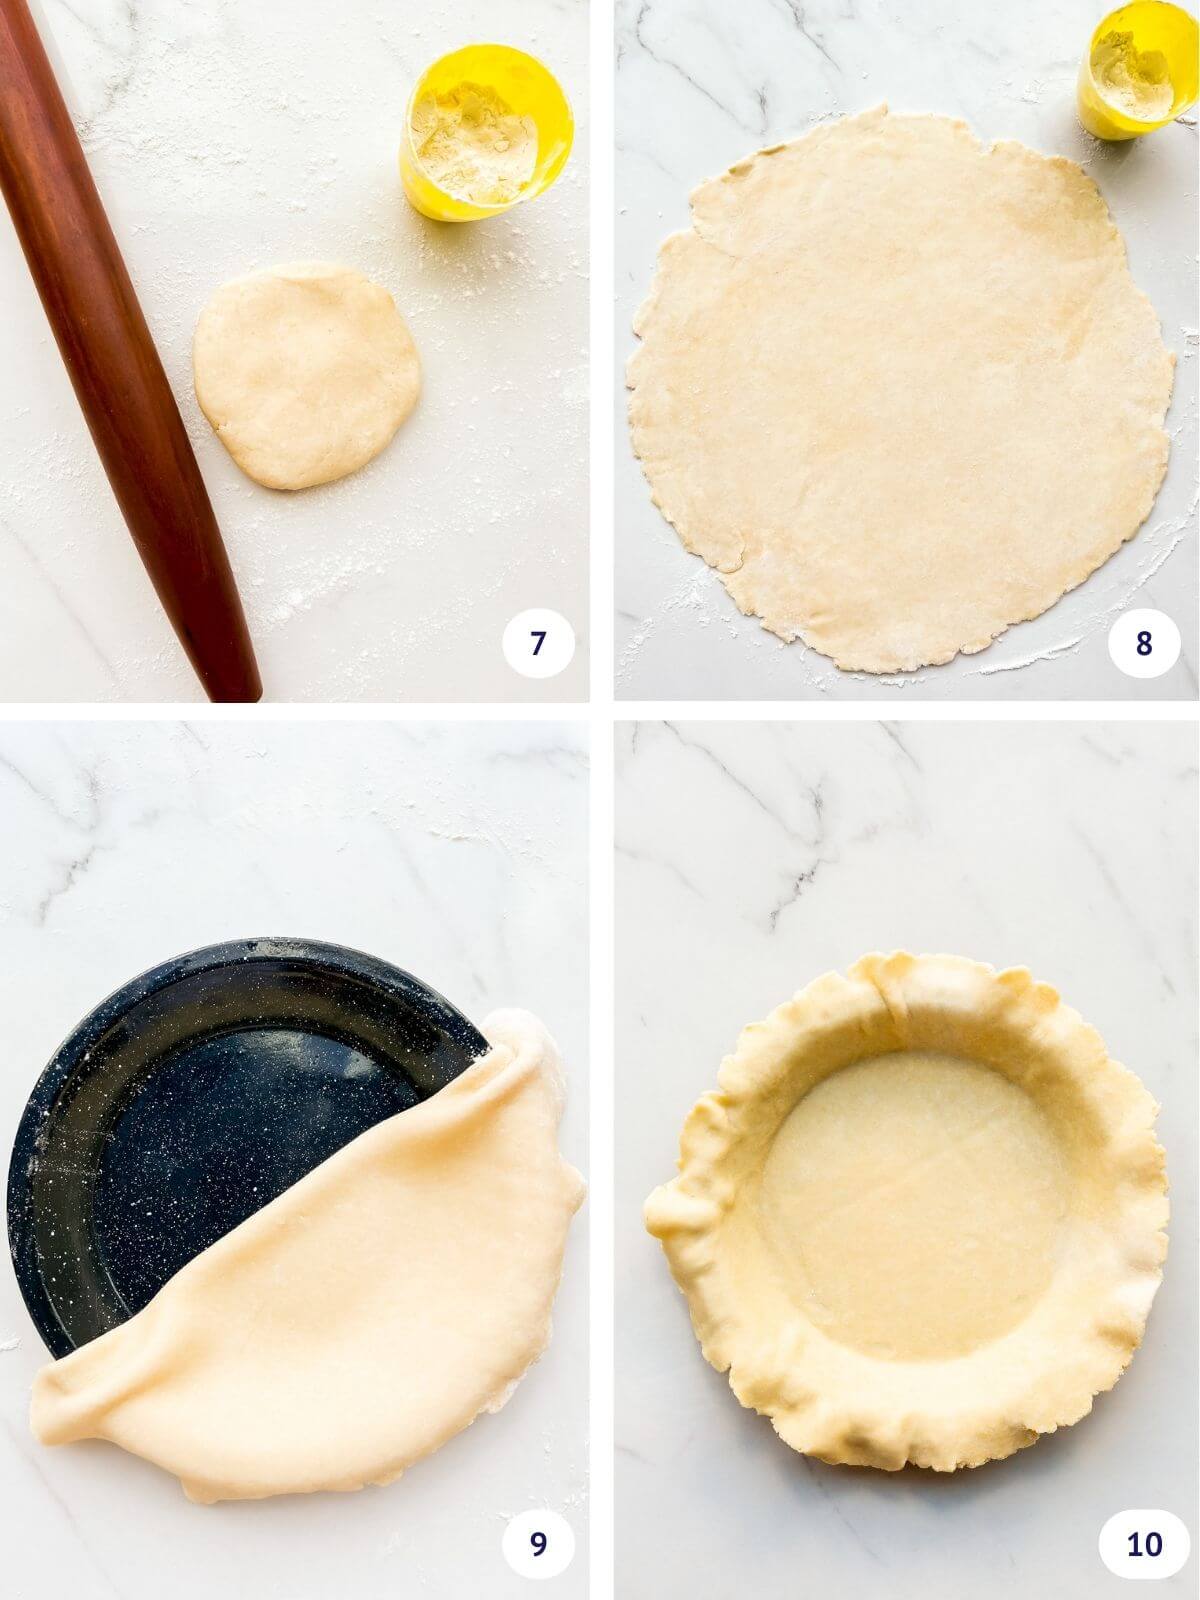 Collage to show steps of rolling out a disk of pie dough into a large, thin sheet to line a pie plate to make the bottom crust.